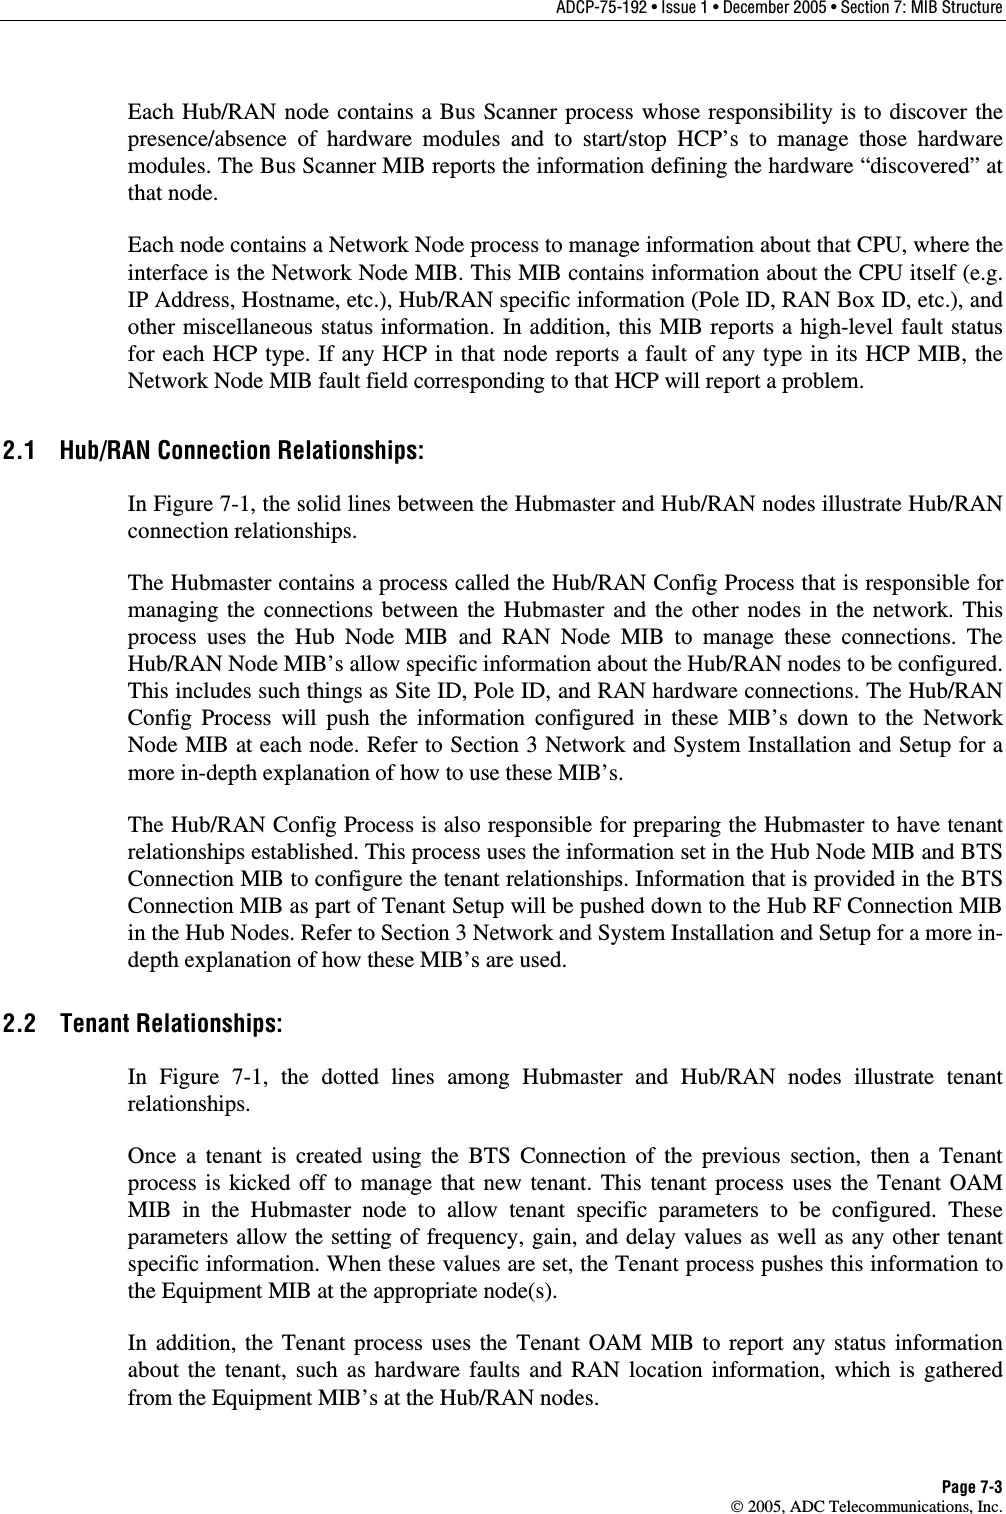 ADCP-75-192 • Issue 1 • December 2005 • Section 7: MIB Structure Page 7-3  2005, ADC Telecommunications, Inc. Each Hub/RAN node contains a Bus Scanner process whose responsibility is to discover the presence/absence of hardware modules and to start/stop HCP’s to manage those hardware modules. The Bus Scanner MIB reports the information defining the hardware “discovered” at that node.  Each node contains a Network Node process to manage information about that CPU, where the interface is the Network Node MIB. This MIB contains information about the CPU itself (e.g. IP Address, Hostname, etc.), Hub/RAN specific information (Pole ID, RAN Box ID, etc.), and other miscellaneous status information. In addition, this MIB reports a high-level fault status for each HCP type. If any HCP in that node reports a fault of any type in its HCP MIB, the Network Node MIB fault field corresponding to that HCP will report a problem.  2.1  Hub/RAN Connection Relationships: In Figure 7-1, the solid lines between the Hubmaster and Hub/RAN nodes illustrate Hub/RAN connection relationships.  The Hubmaster contains a process called the Hub/RAN Config Process that is responsible for managing the connections between the Hubmaster and the other nodes in the network. This process uses the Hub Node MIB and RAN Node MIB to manage these connections. The Hub/RAN Node MIB’s allow specific information about the Hub/RAN nodes to be configured. This includes such things as Site ID, Pole ID, and RAN hardware connections. The Hub/RAN Config Process will push the information configured in these MIB’s down to the Network Node MIB at each node. Refer to Section 3 Network and System Installation and Setup for a more in-depth explanation of how to use these MIB’s.  The Hub/RAN Config Process is also responsible for preparing the Hubmaster to have tenant relationships established. This process uses the information set in the Hub Node MIB and BTS Connection MIB to configure the tenant relationships. Information that is provided in the BTS Connection MIB as part of Tenant Setup will be pushed down to the Hub RF Connection MIB in the Hub Nodes. Refer to Section 3 Network and System Installation and Setup for a more in-depth explanation of how these MIB’s are used.  2.2 Tenant Relationships: In Figure 7-1, the dotted lines among Hubmaster and Hub/RAN nodes illustrate tenant relationships. Once a tenant is created using the BTS Connection of the previous section, then a Tenant process is kicked off to manage that new tenant. This tenant process uses the Tenant OAM MIB in the Hubmaster node to allow tenant specific parameters to be configured. These parameters allow the setting of frequency, gain, and delay values as well as any other tenant specific information. When these values are set, the Tenant process pushes this information to the Equipment MIB at the appropriate node(s).  In addition, the Tenant process uses the Tenant OAM MIB to report any status information about the tenant, such as hardware faults and RAN location information, which is gathered from the Equipment MIB’s at the Hub/RAN nodes.  